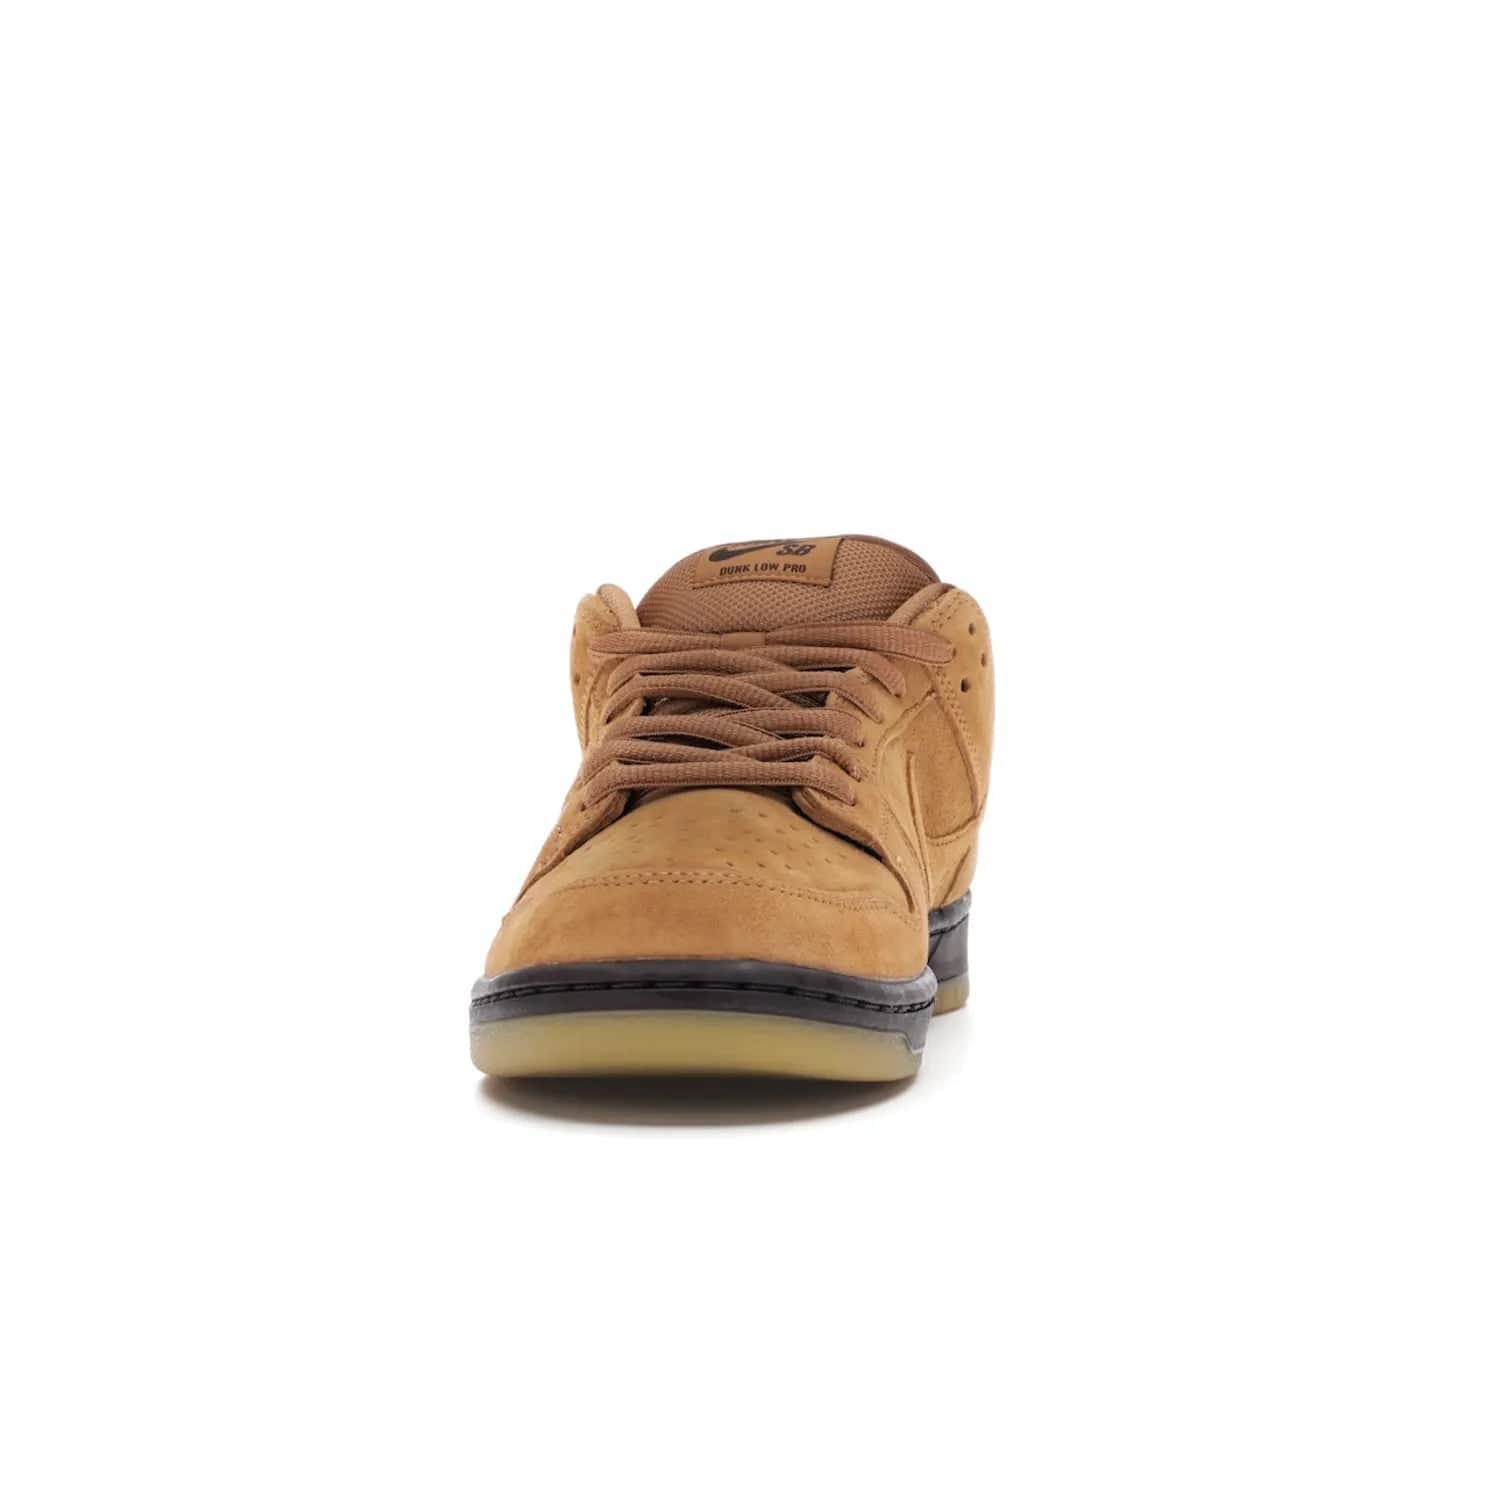 Nike SB Dunk Low Wheat (2021/2023) - Image 11 - Only at www.BallersClubKickz.com - The Nike SB Dunk Low Wheat (2021/2023)has a sleek silhouette and wheat suede upper. Tan tones for lining, mesh tongues, and laces. Iconic color palette midsole, perforated boxing toe. Brown branding on tongue and heel. Gum rubber outsole with partitioned pattern for traction. Eschewed in Feb 2021 for $110.